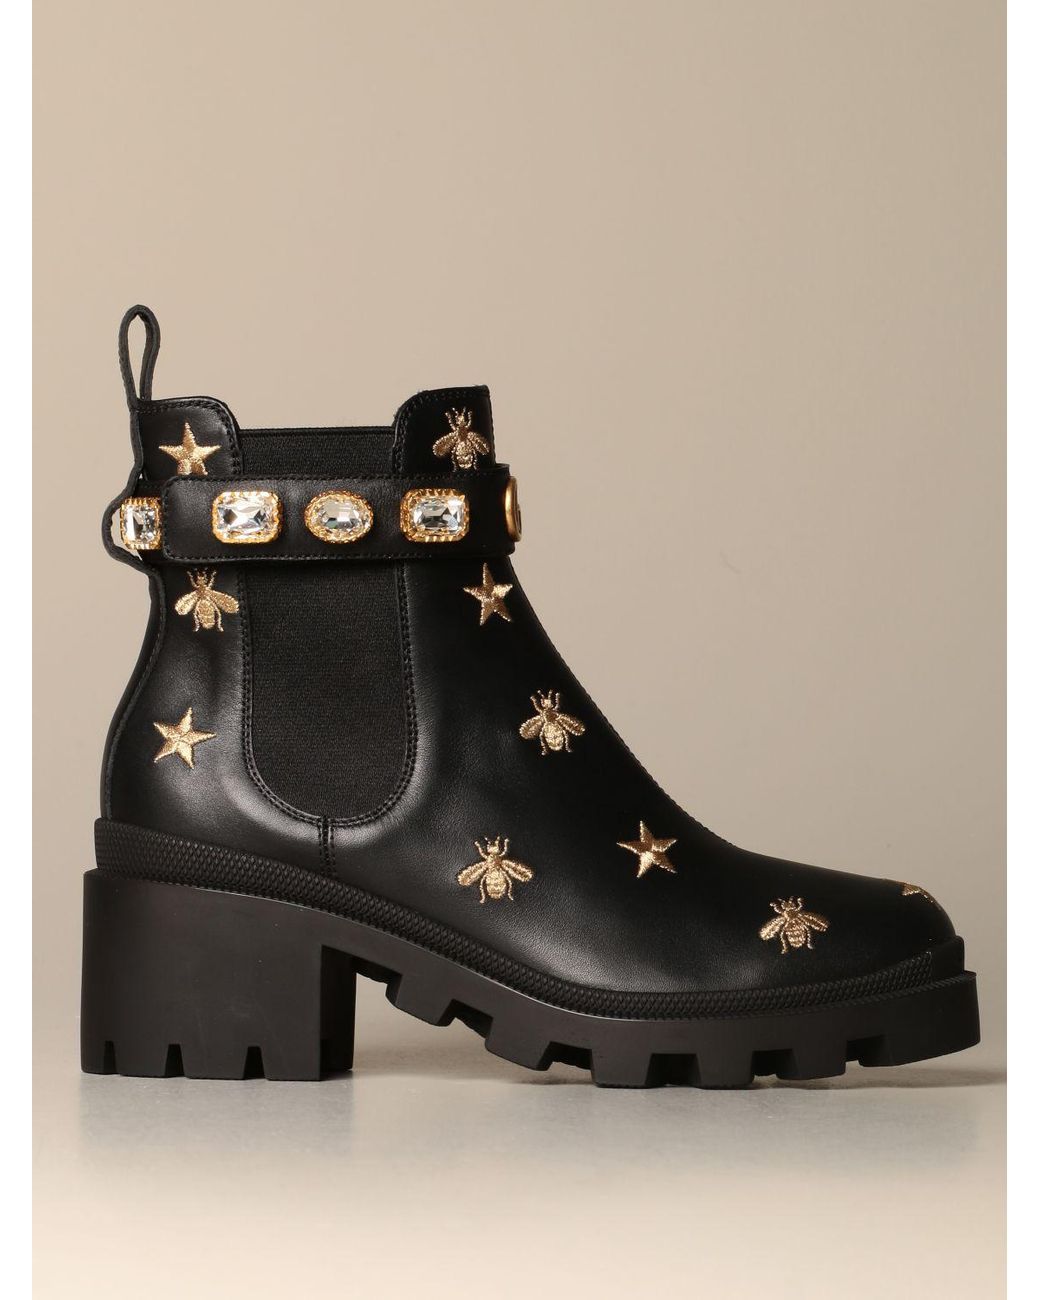 Gucci Embroidered Leather Ankle Boot With Belt in Black | Lyst